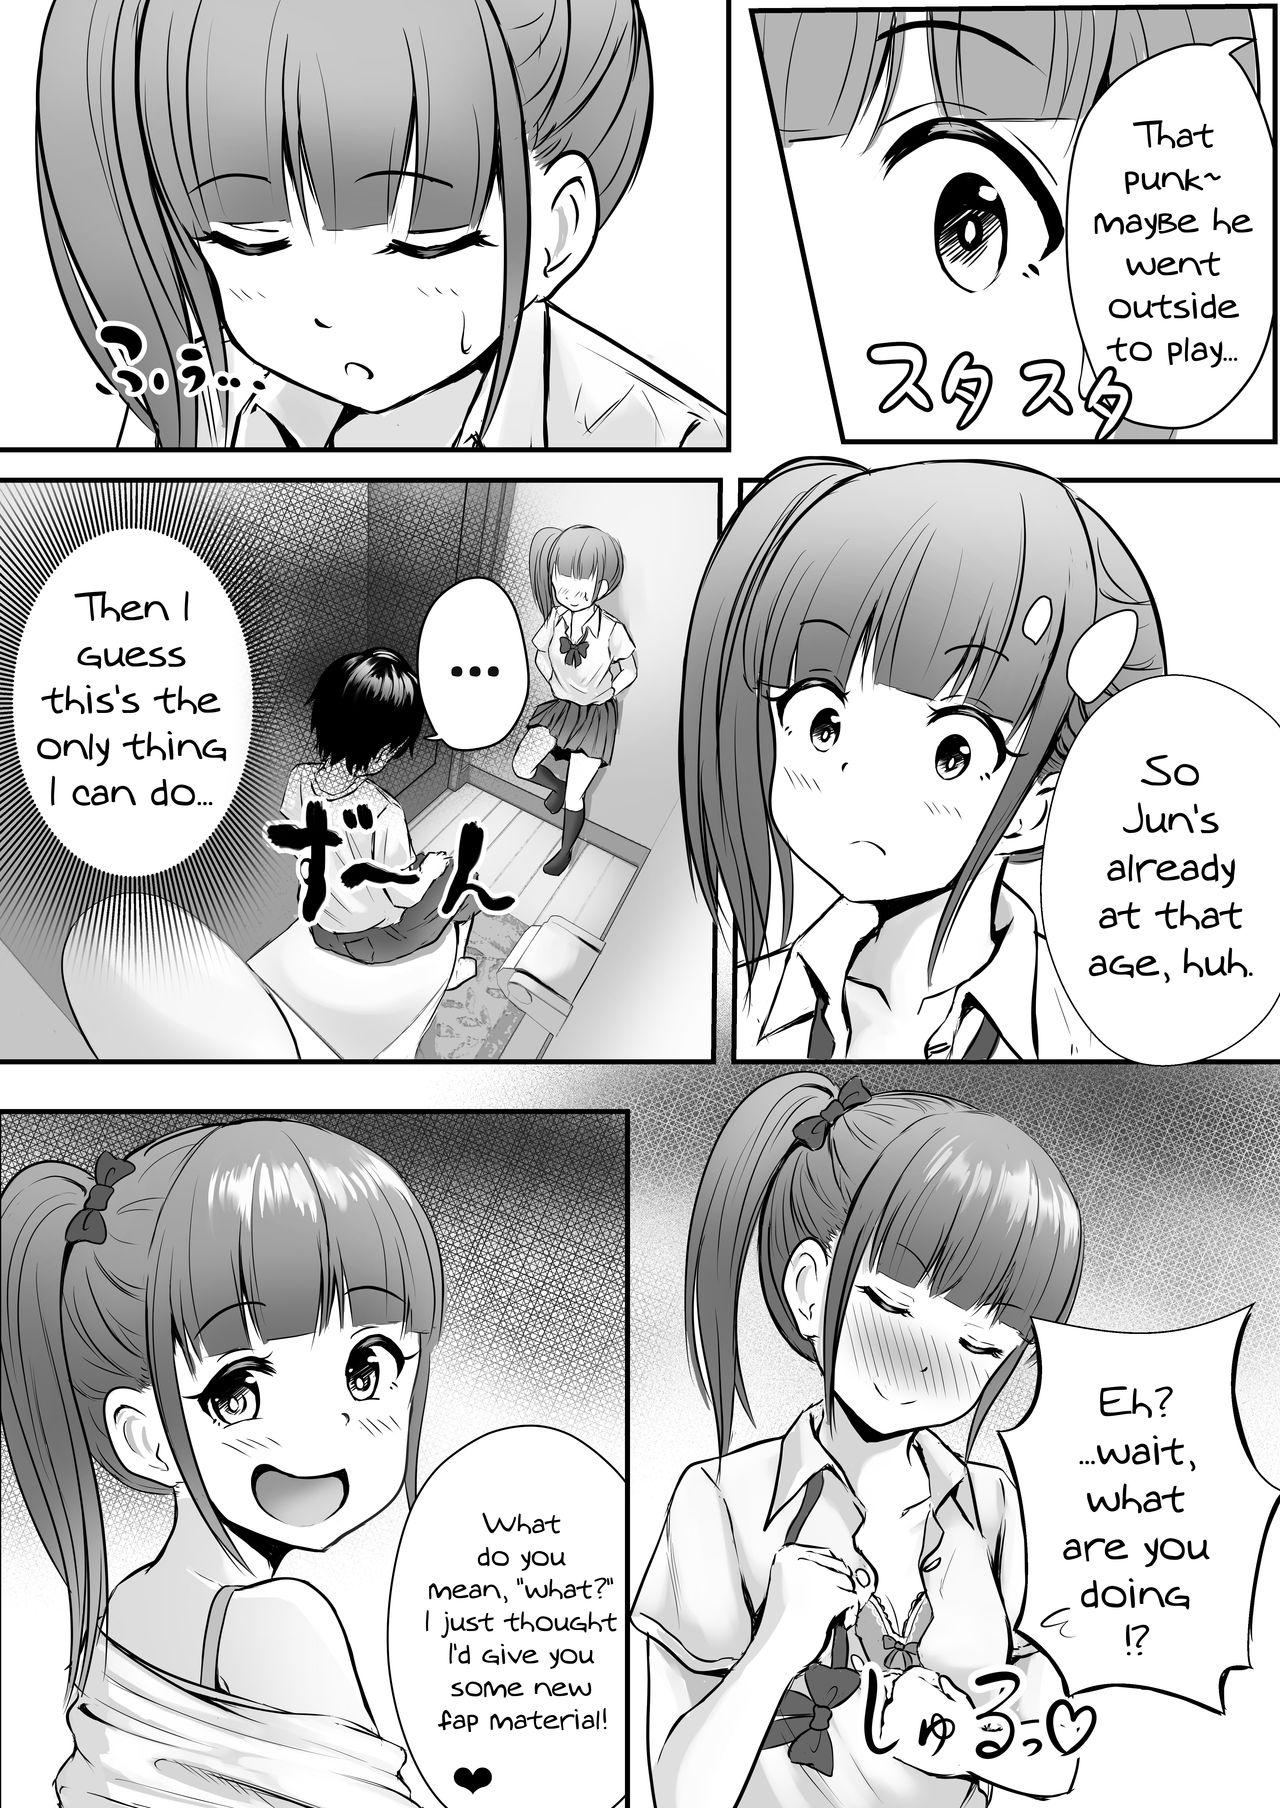 Pmv Ane no Shinyuu to Ikaseai | Getting Lewd With My Sister's Best Friend - Original Babysitter - Page 9